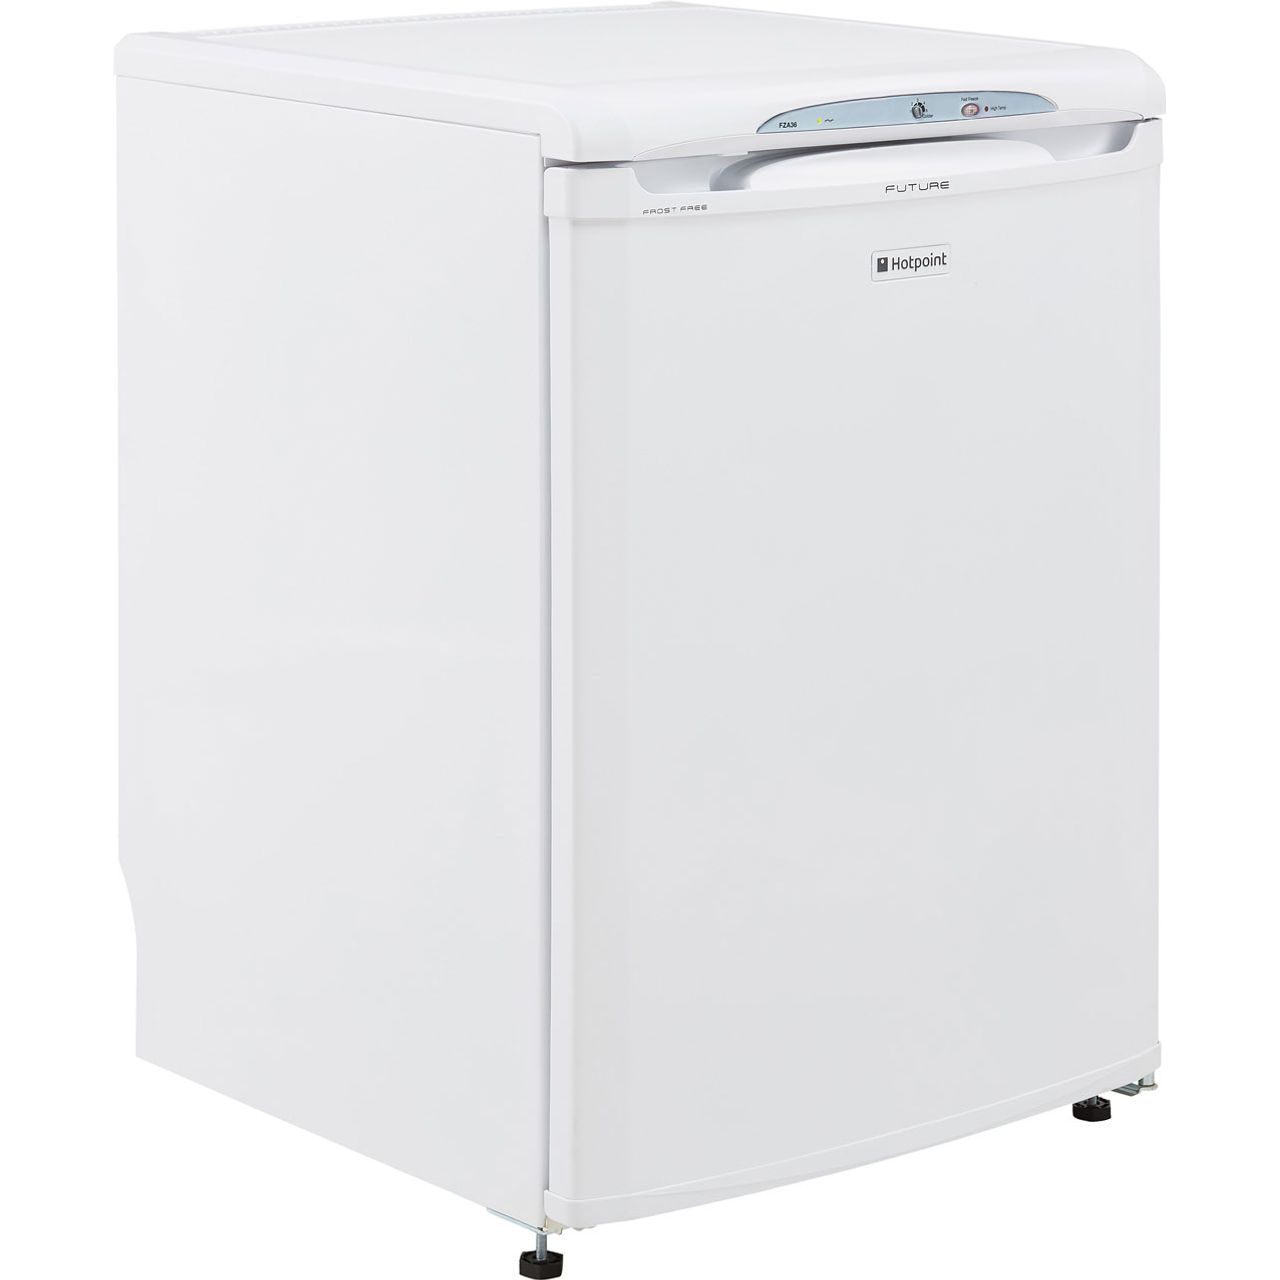 Hotpoint FZA36P.1 Frost Free Under Counter Freezer Review